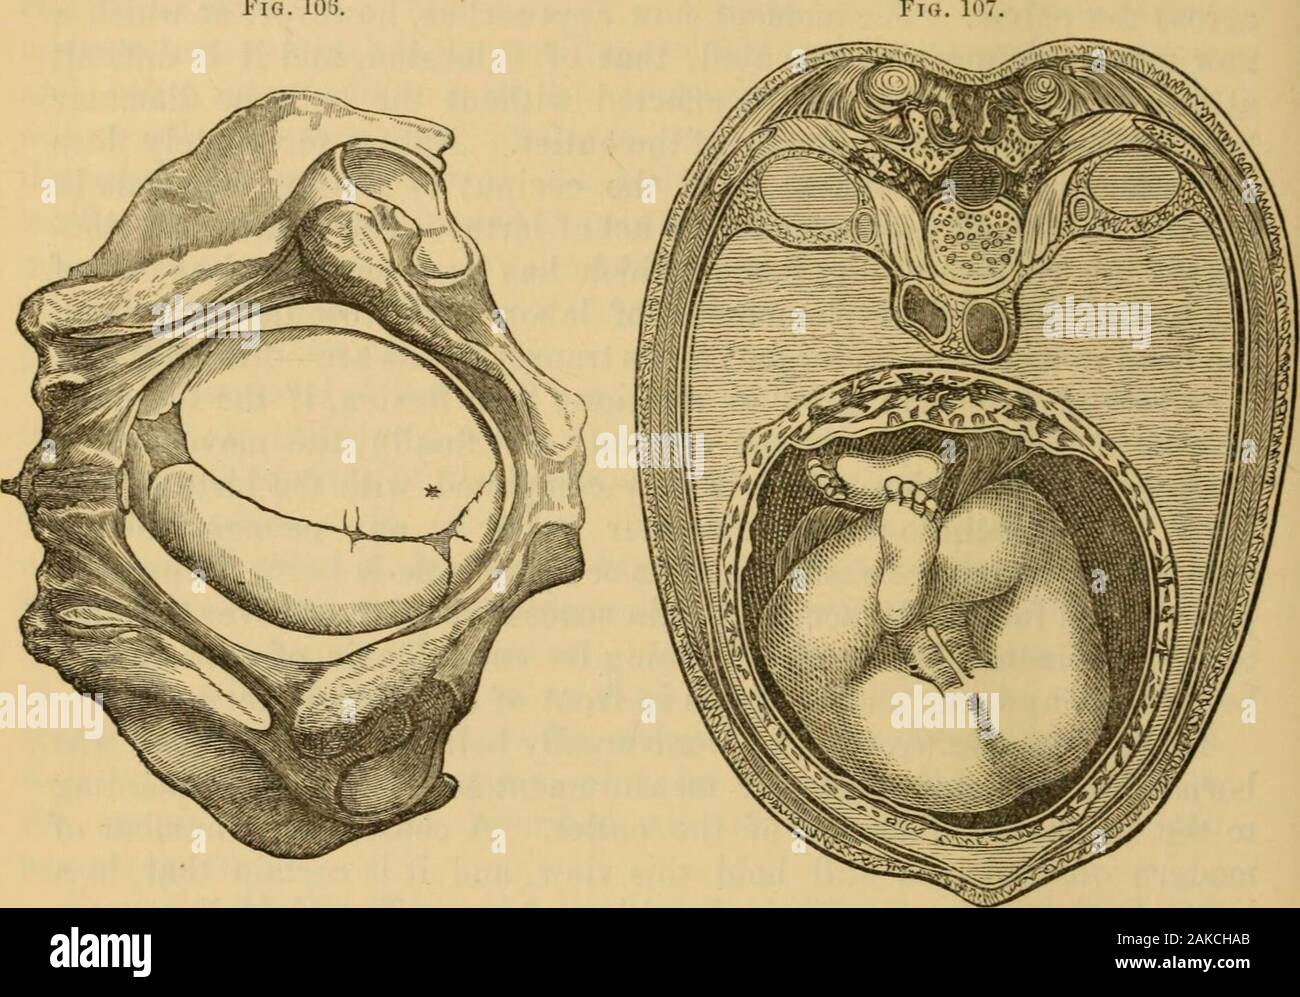 A System of midwifery : including the diseases of pregnancy and the puerperal state . havehut too faithfully copied. For these obliquities are of comparativelytrifling importance, and should never have been bracketed with theother and really important movements. Until he has fully masteredthe latter, we should ad is€ the student to take no note of these obliqui-ties. The mosi recent writers on the subject (Kiineke, Hodge, and Duncan) all dispute the conclusions of Naegele and argue in favor of the parallelism, or, as they term it, Synclitism, of the biparietal and cervico-bregmatic plane- of Stock Photo